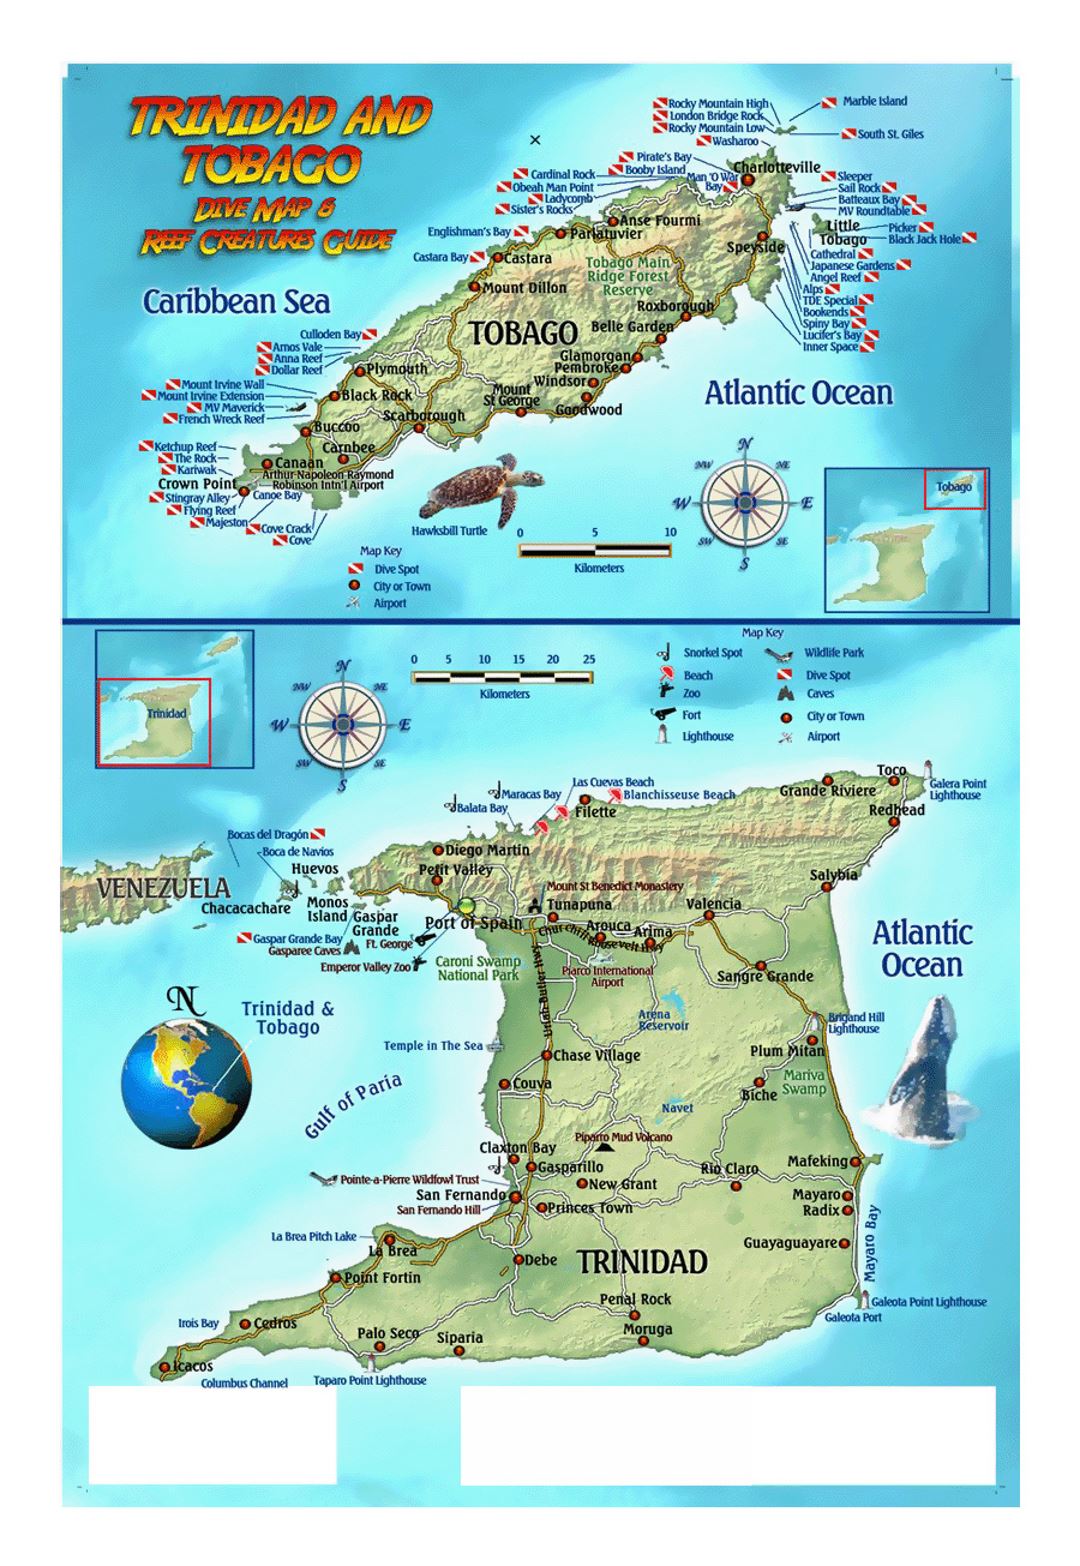 Detailed dive map of Trinidad and Tobago